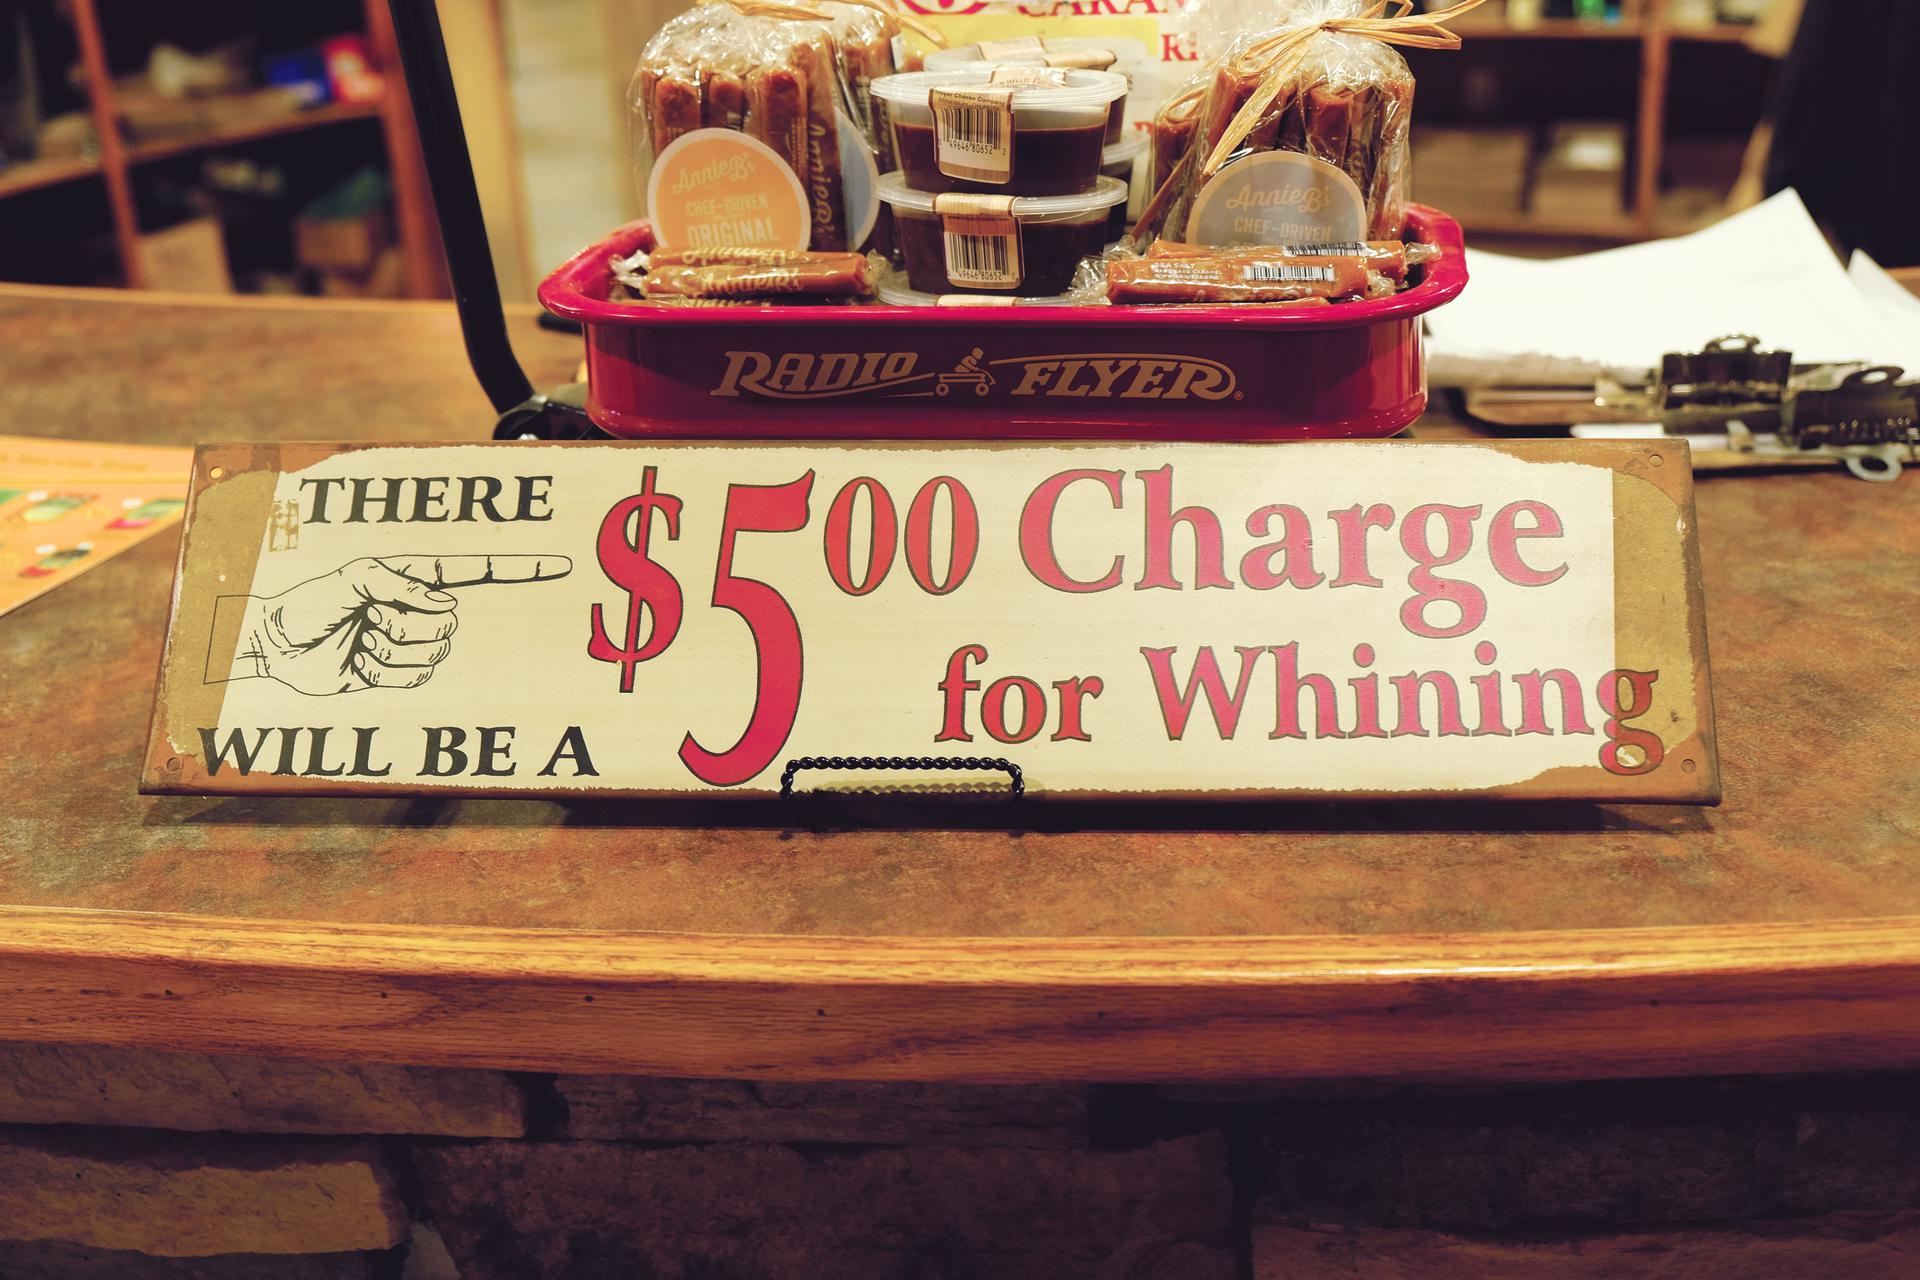 There will be a $5 charge for whining